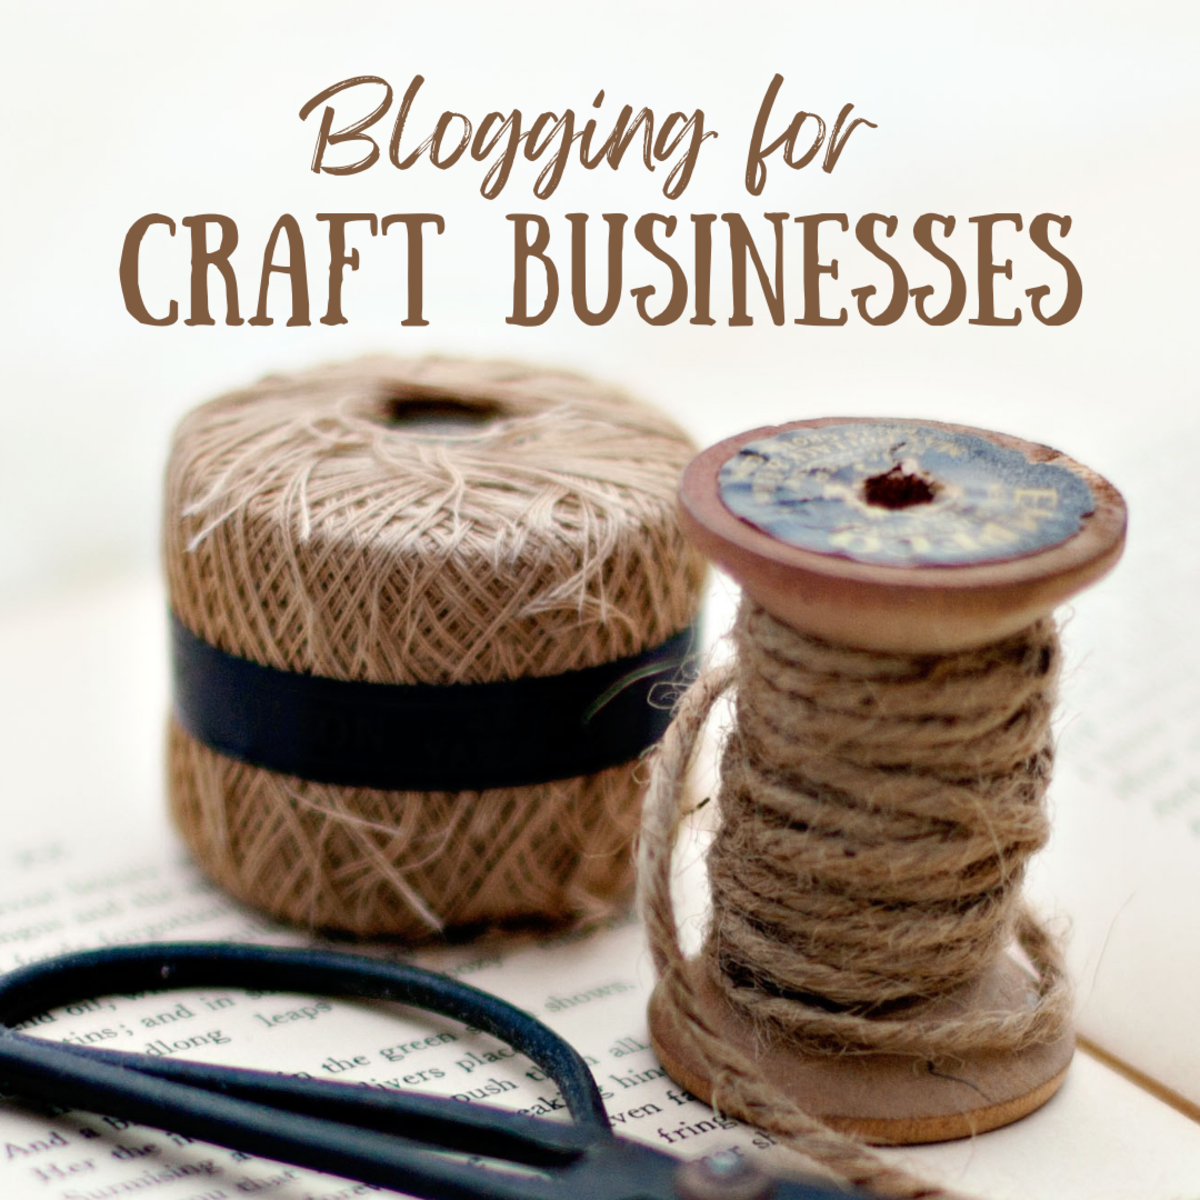 How to Start and Maintain Successful Craft Blogs for Businesses